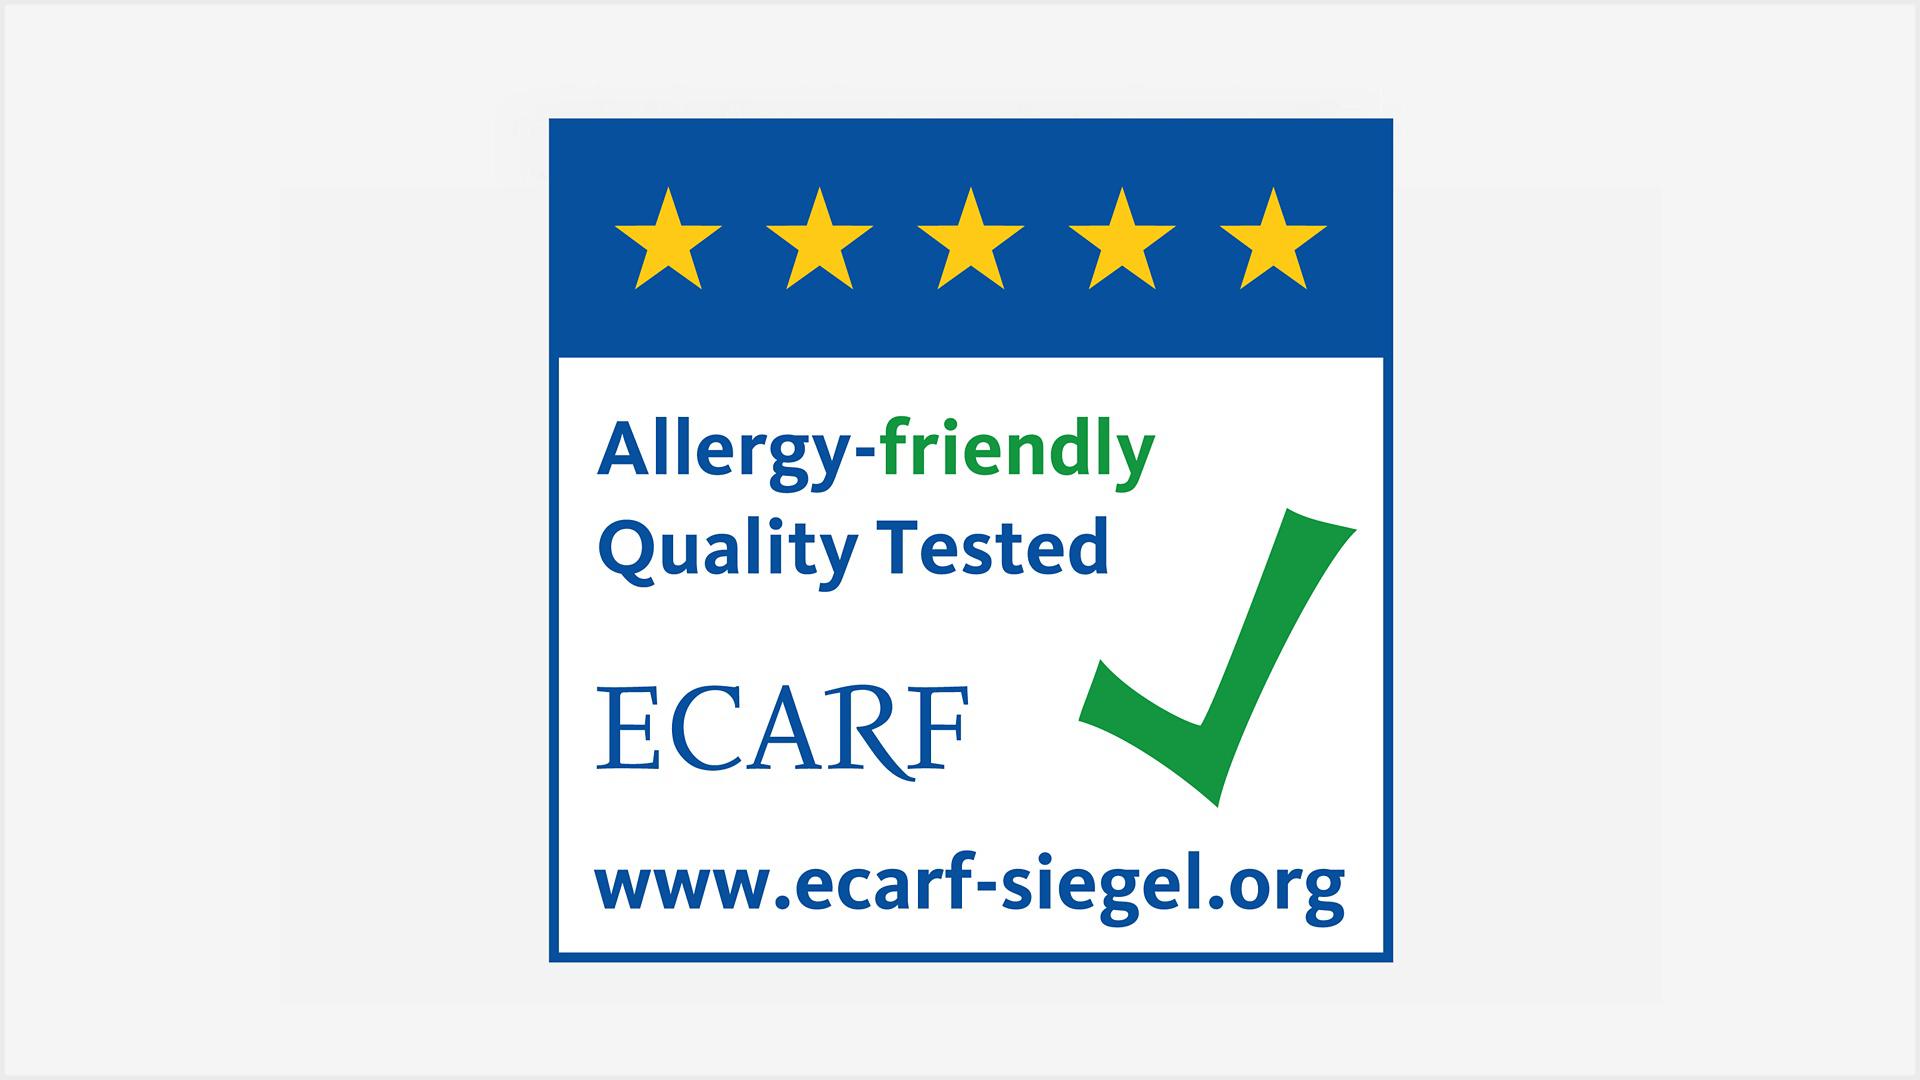 European Centre for Allergy Research Foundation (ECARF)